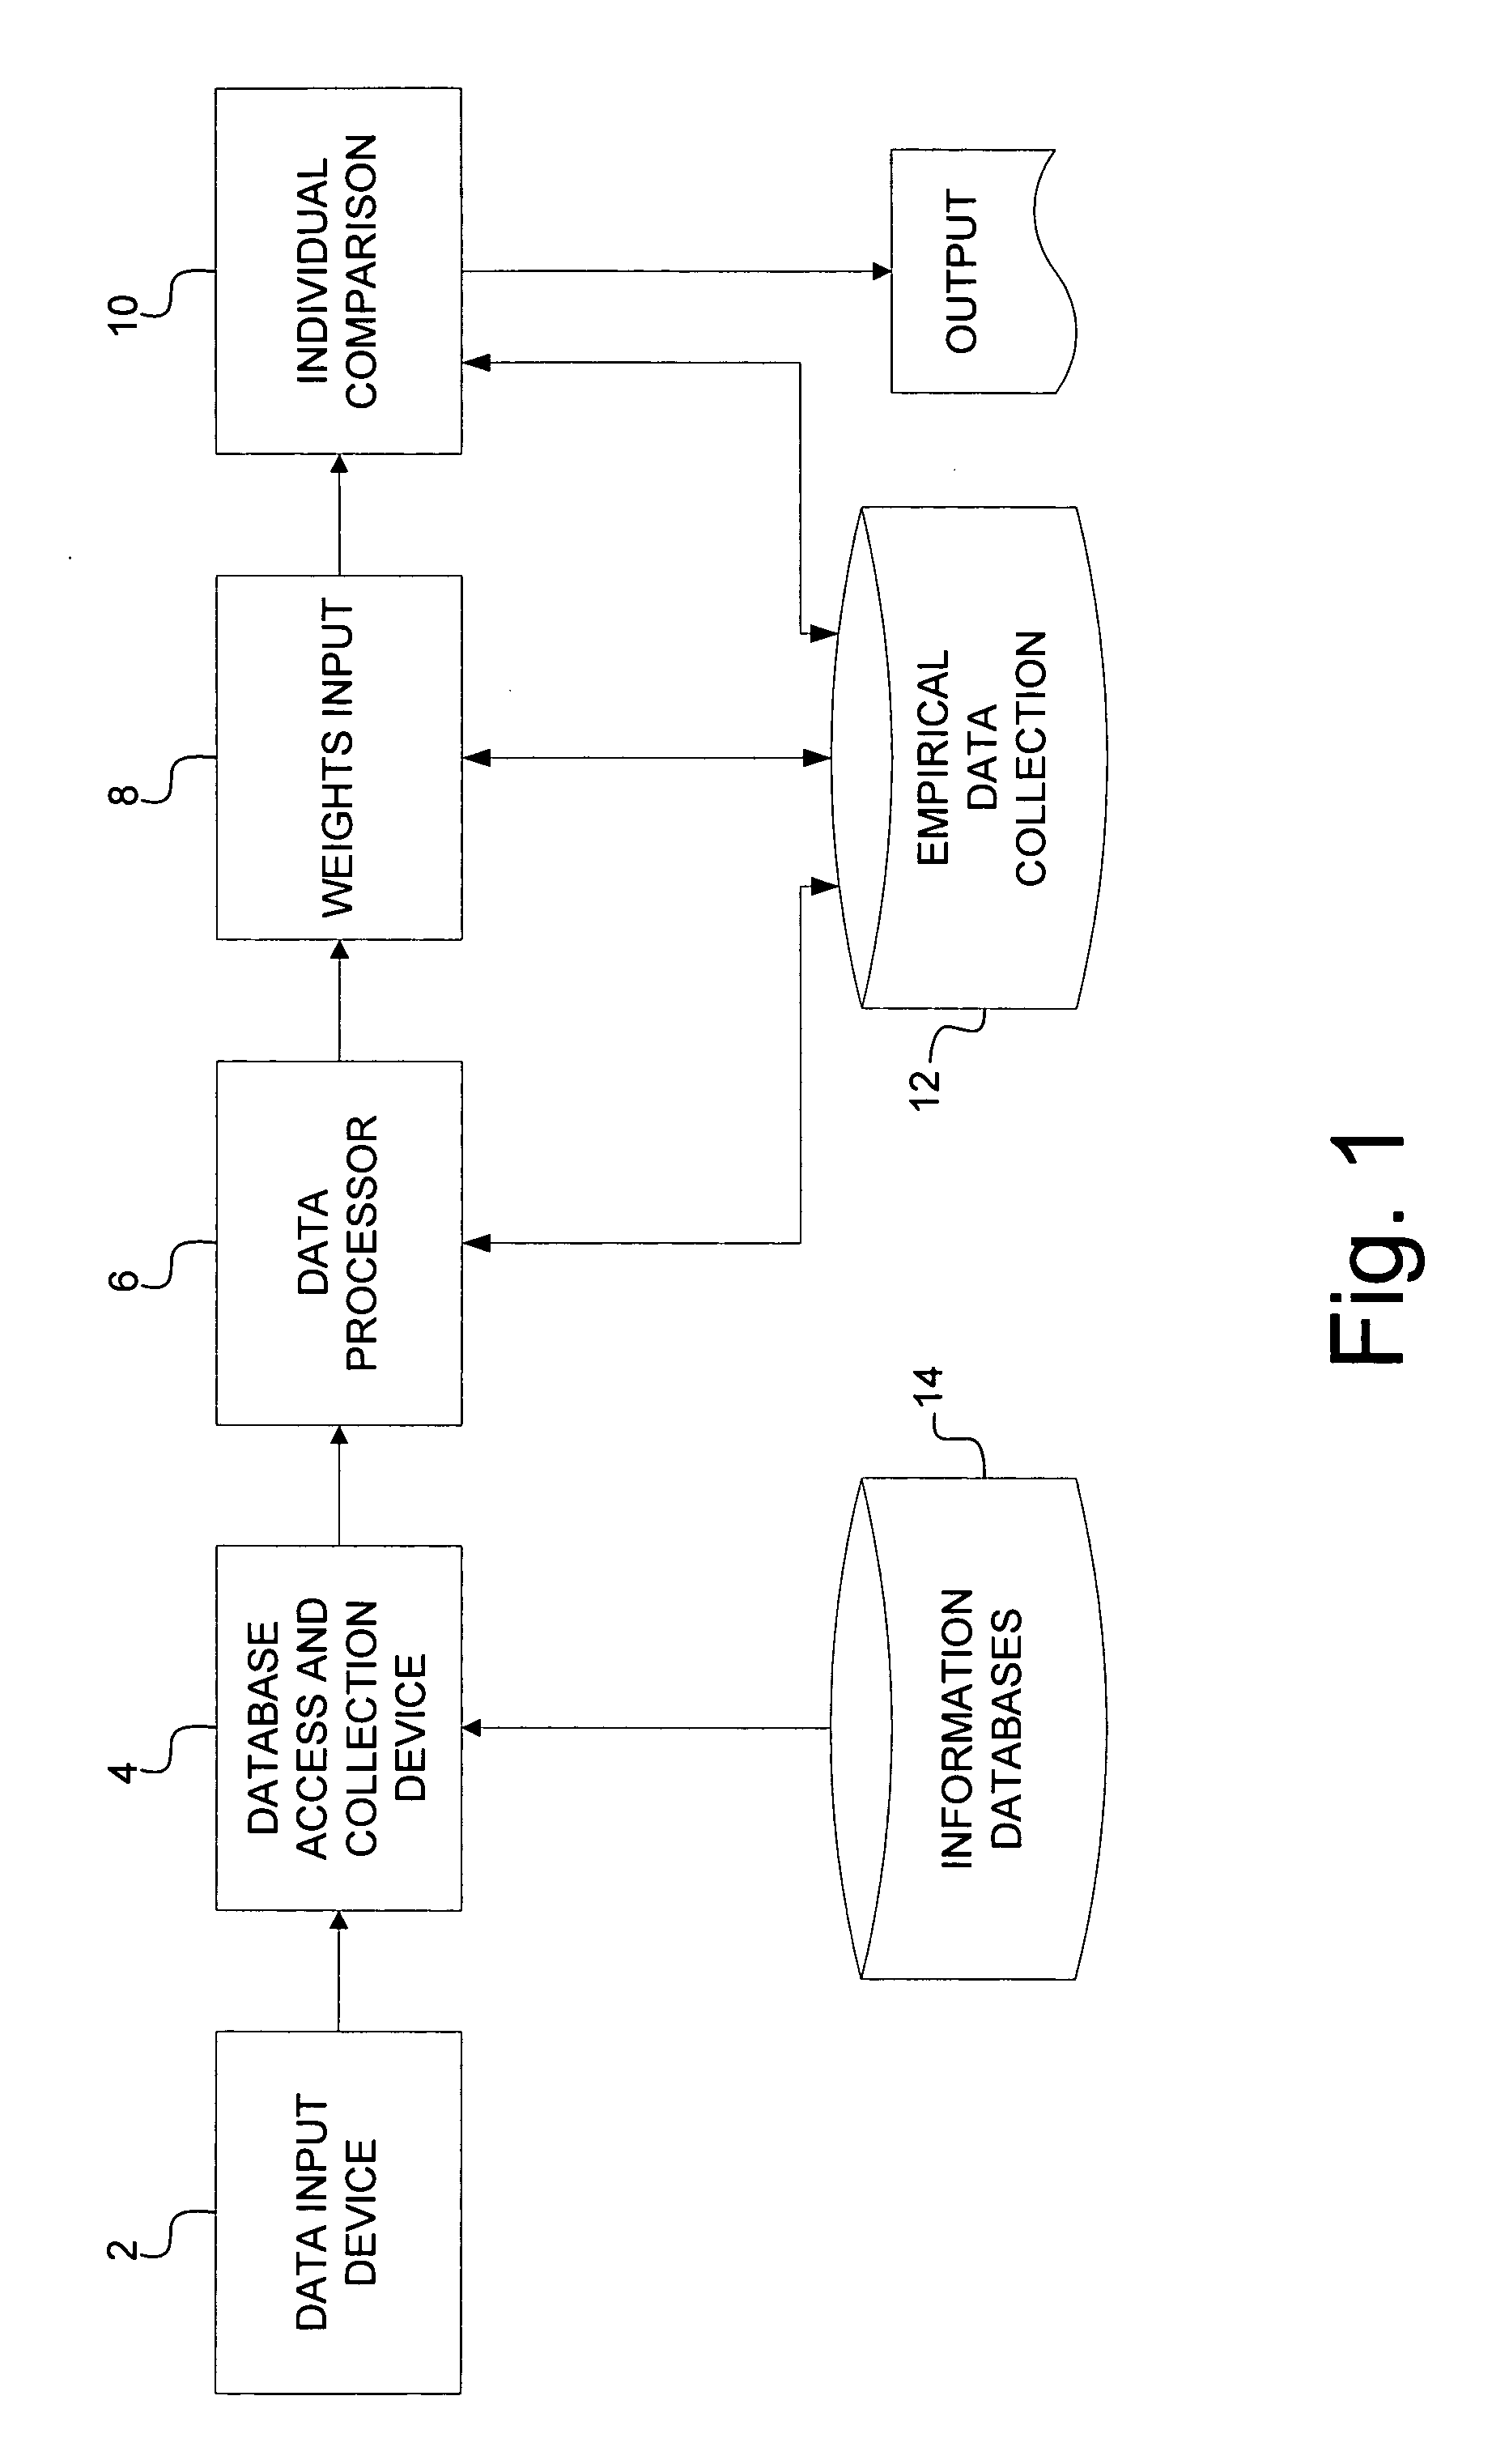 System and method for whole company securitization of intangible assets